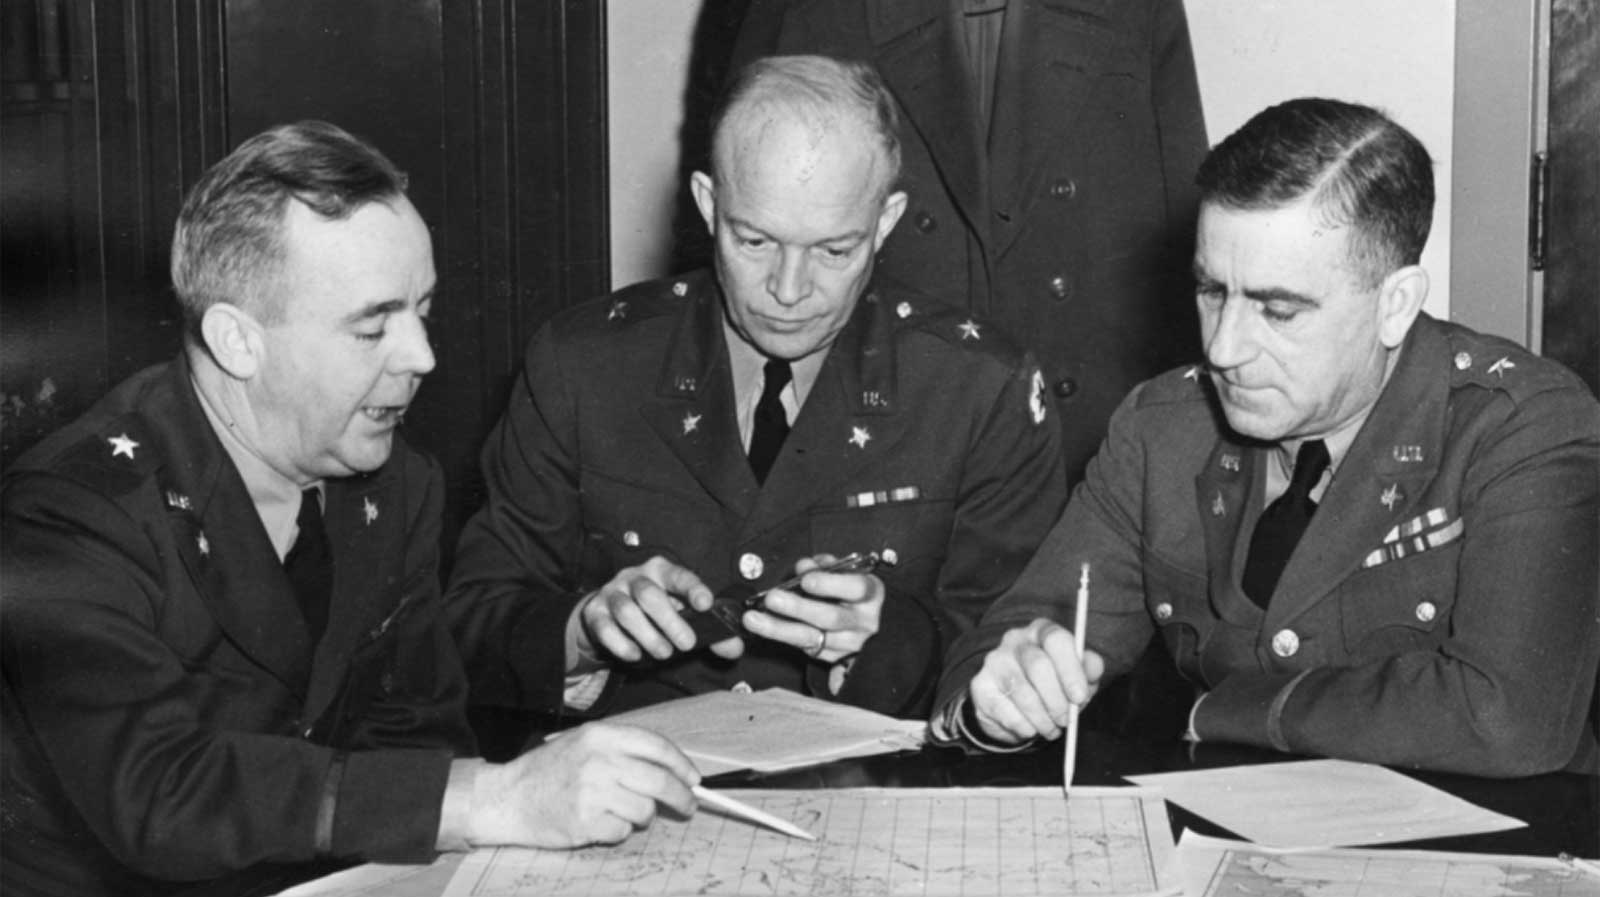 Brigadier General (BG) Dwight D. Eisenhower (center) confers with War Plans Division colleagues BGs Robert W. Crawford (left) and Leonard Gerow (right), in Washington, DC, January, 1942. Promoted to MG in March, Eisenhower thereafter selected Frederick to organize, command, and train the First Special Service Force.